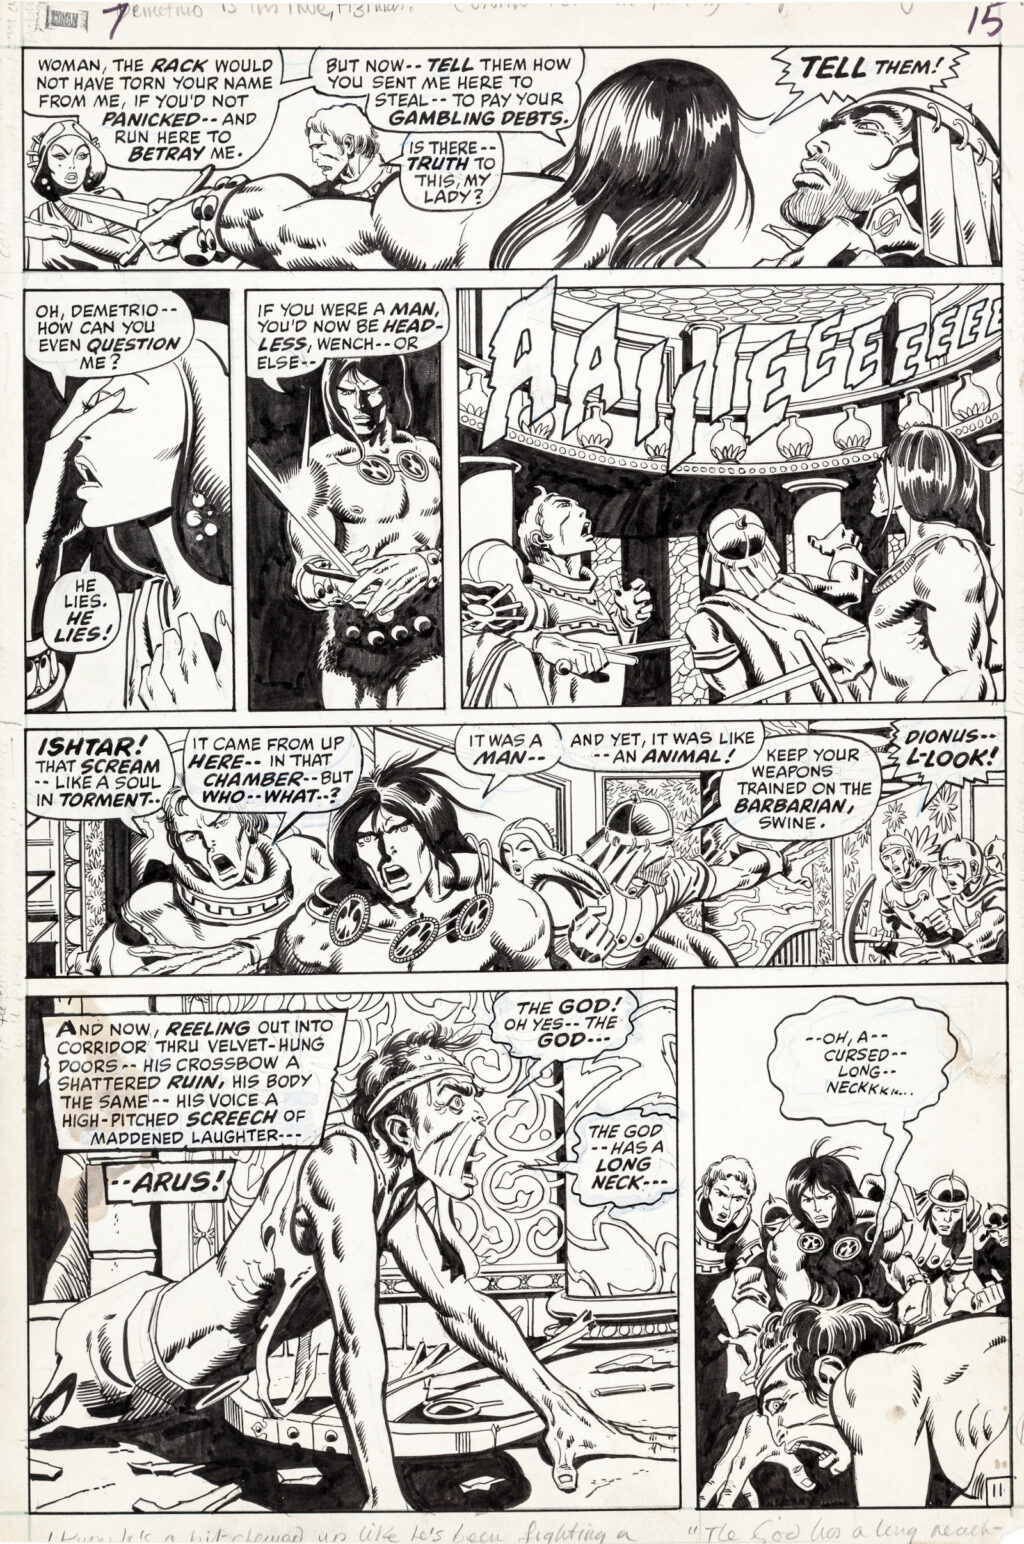 Conan the Barbarian issue 7 page 11 by Barry Smith and Sal Buscema